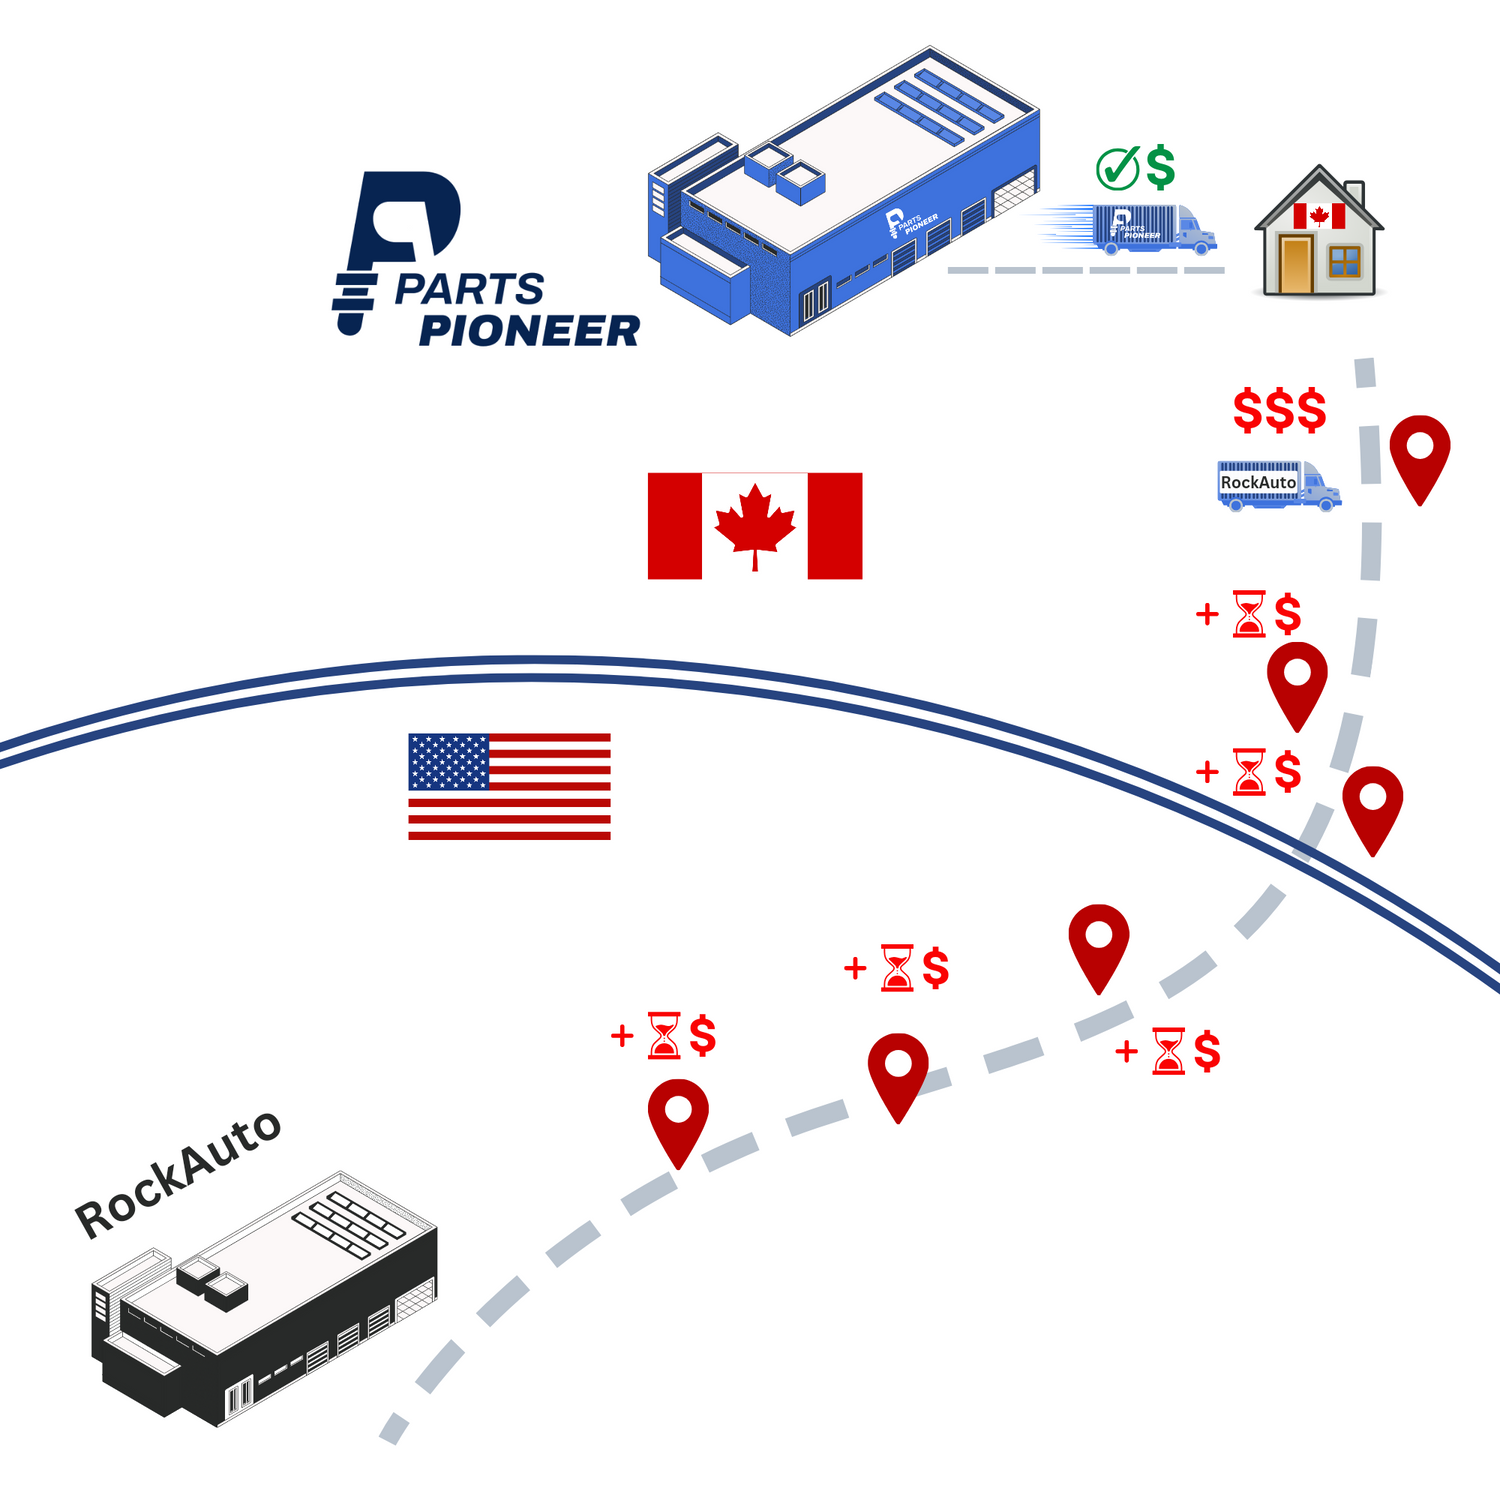 Rockauto Canada shipping comparison with Parts Pioneer, showing Parts Pioneer is faster and cheaper than Rockauto in Canada.